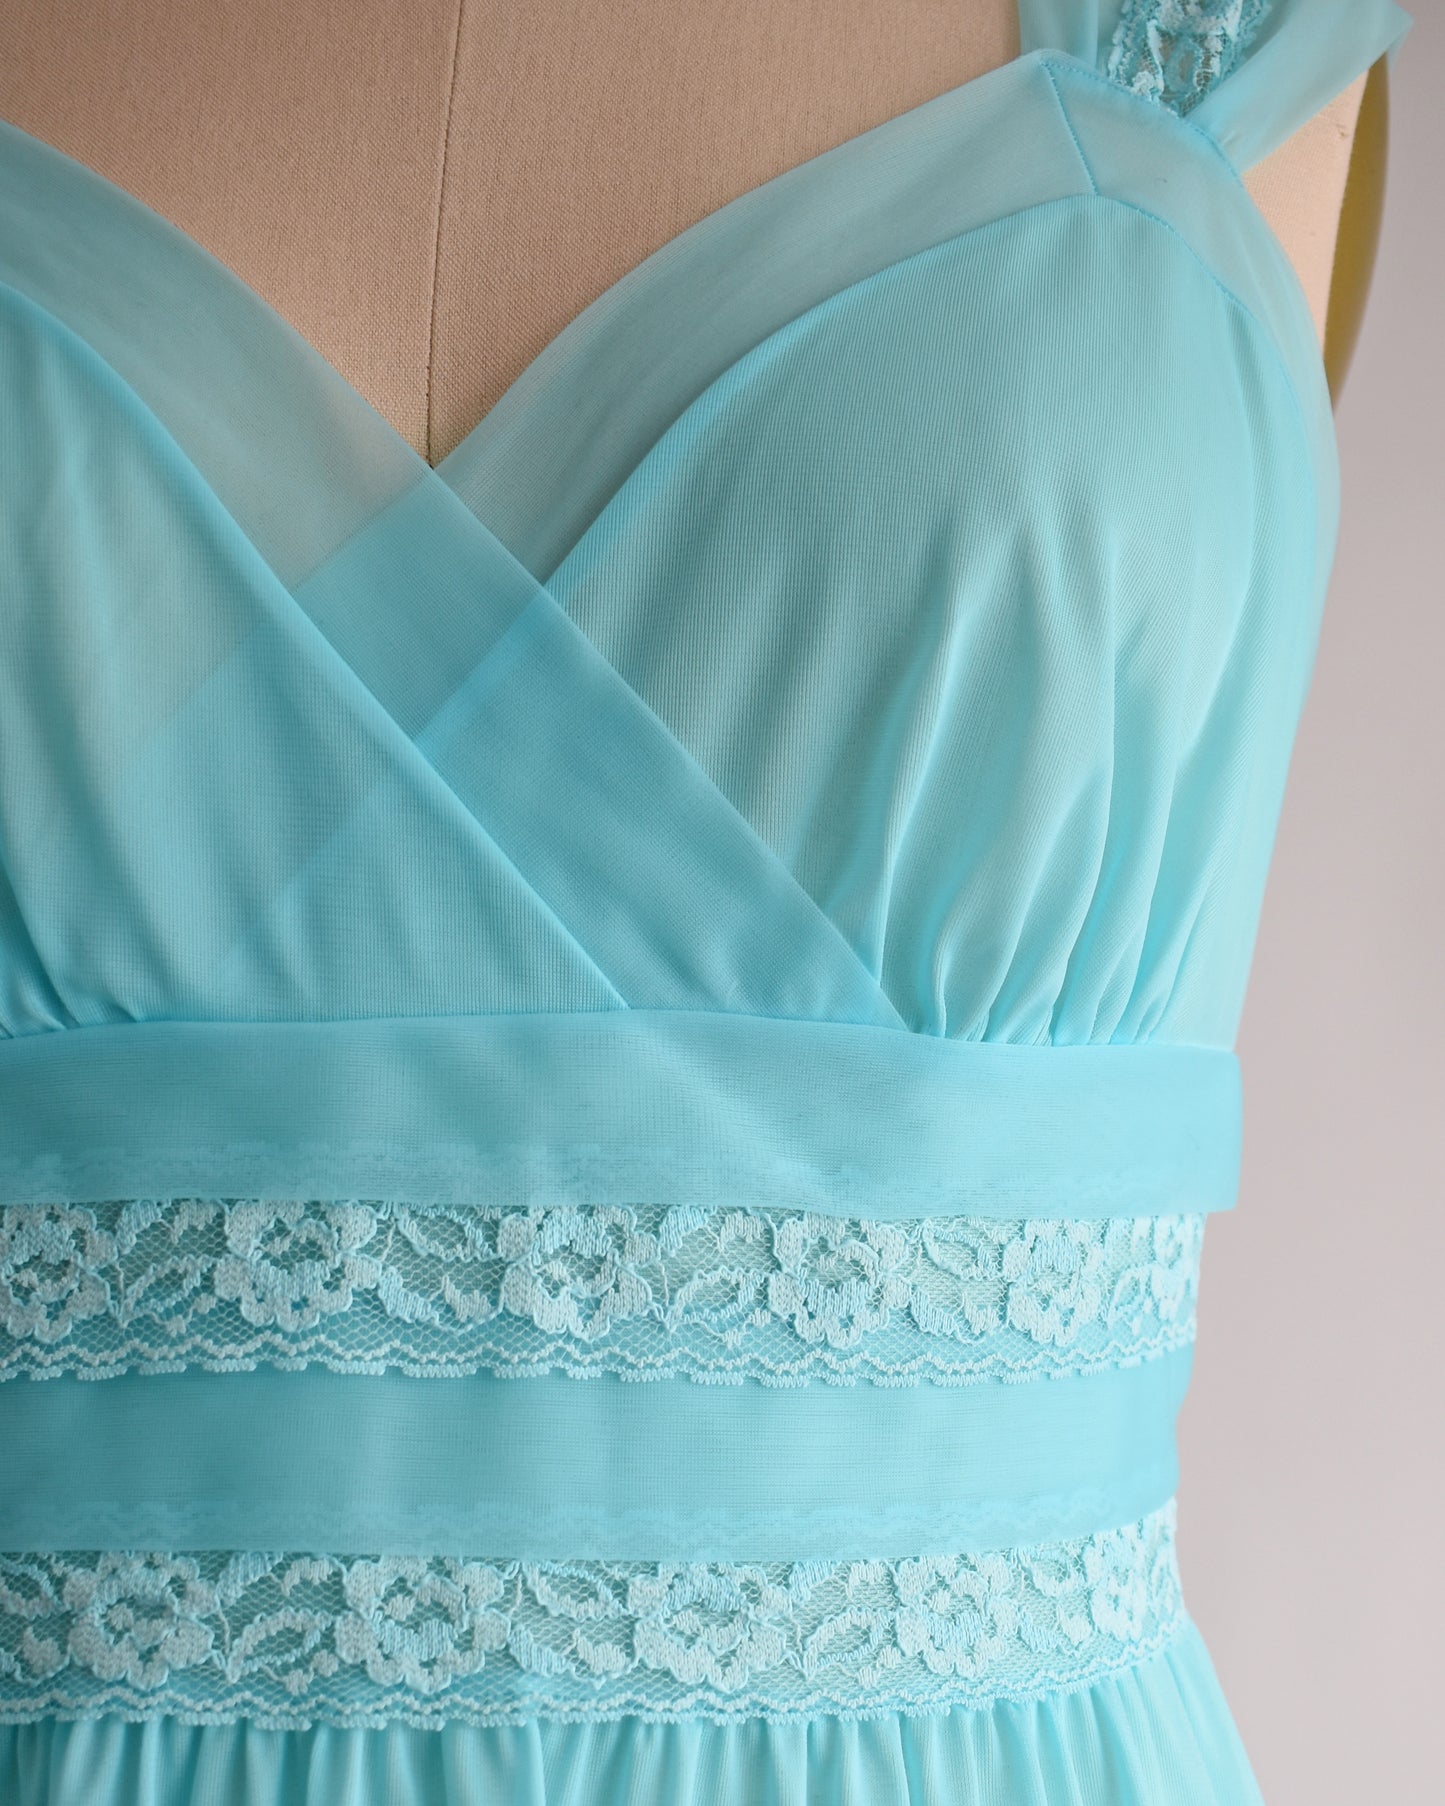 Close up of a vintage 1960s aqua blue lace nightgown with lace trim